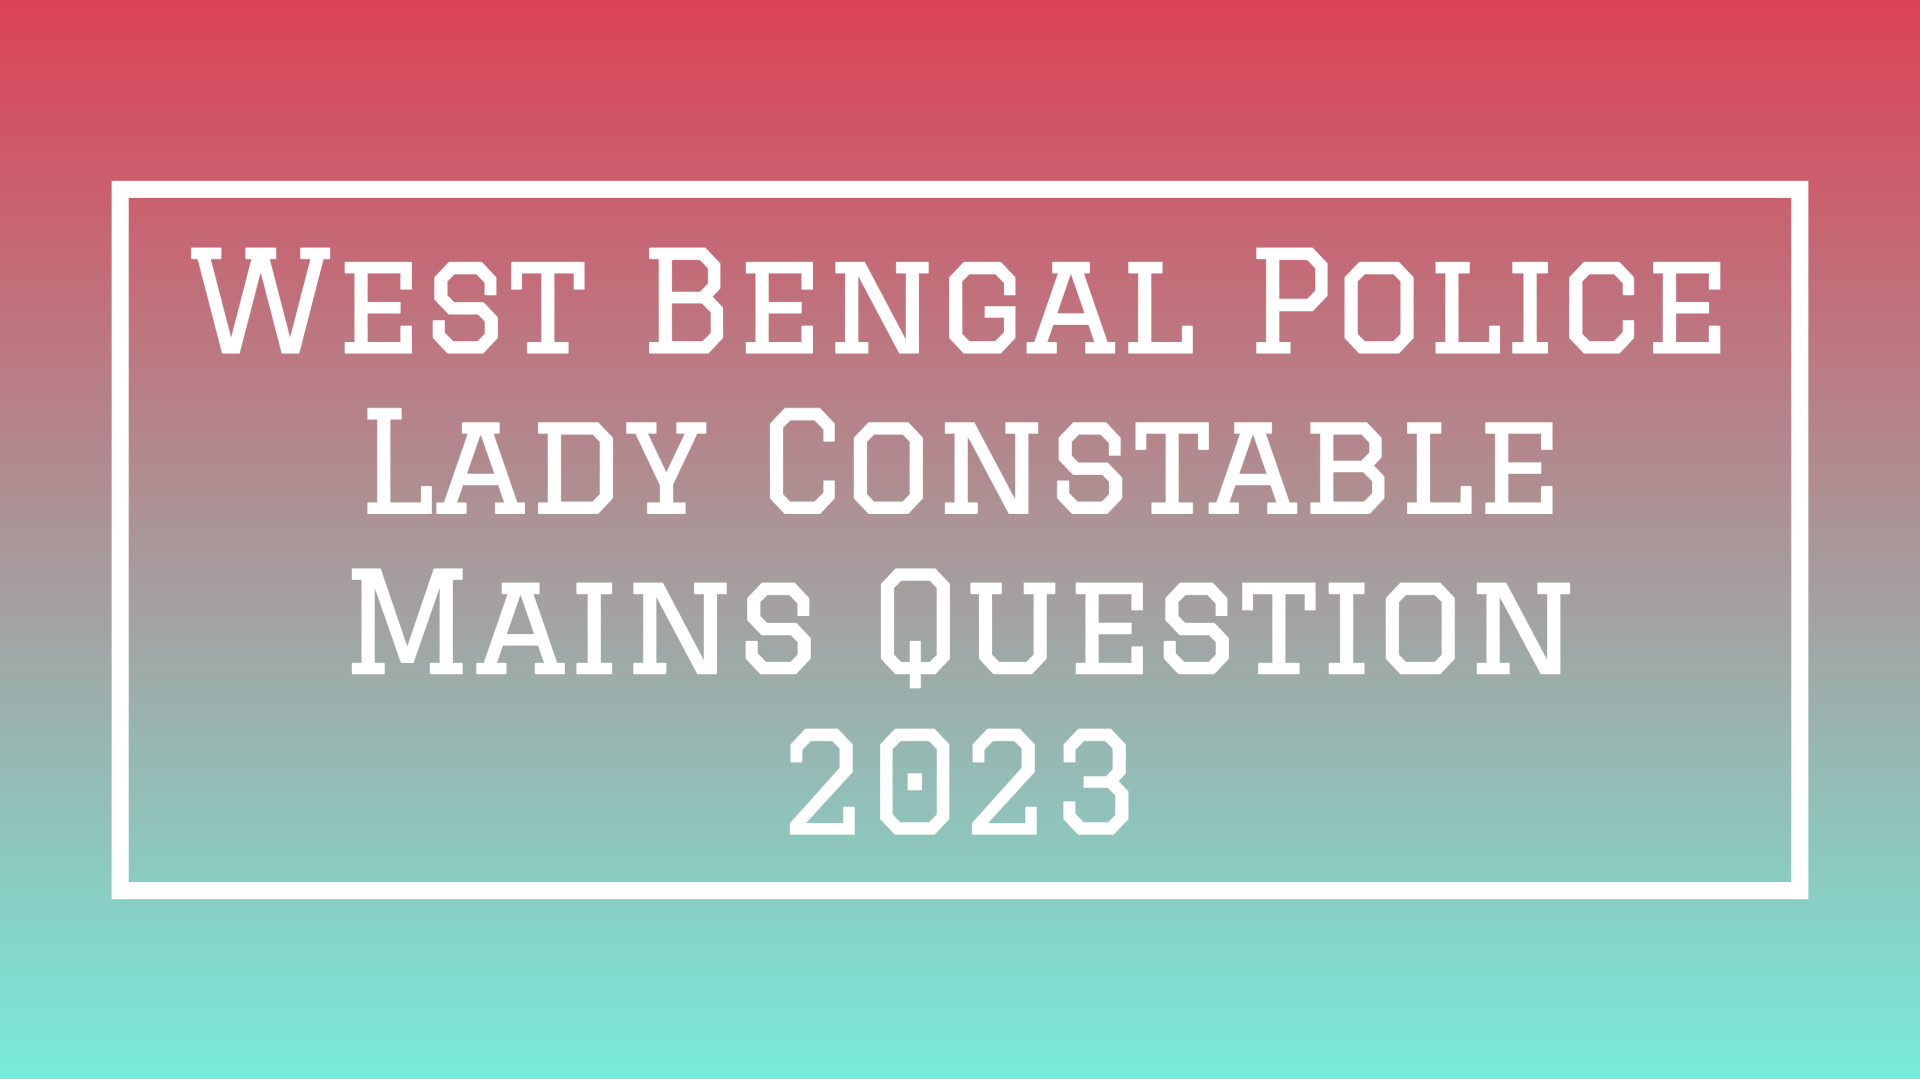 West Bengal Police Lady Constable Mains Exam Question 2023 PDF